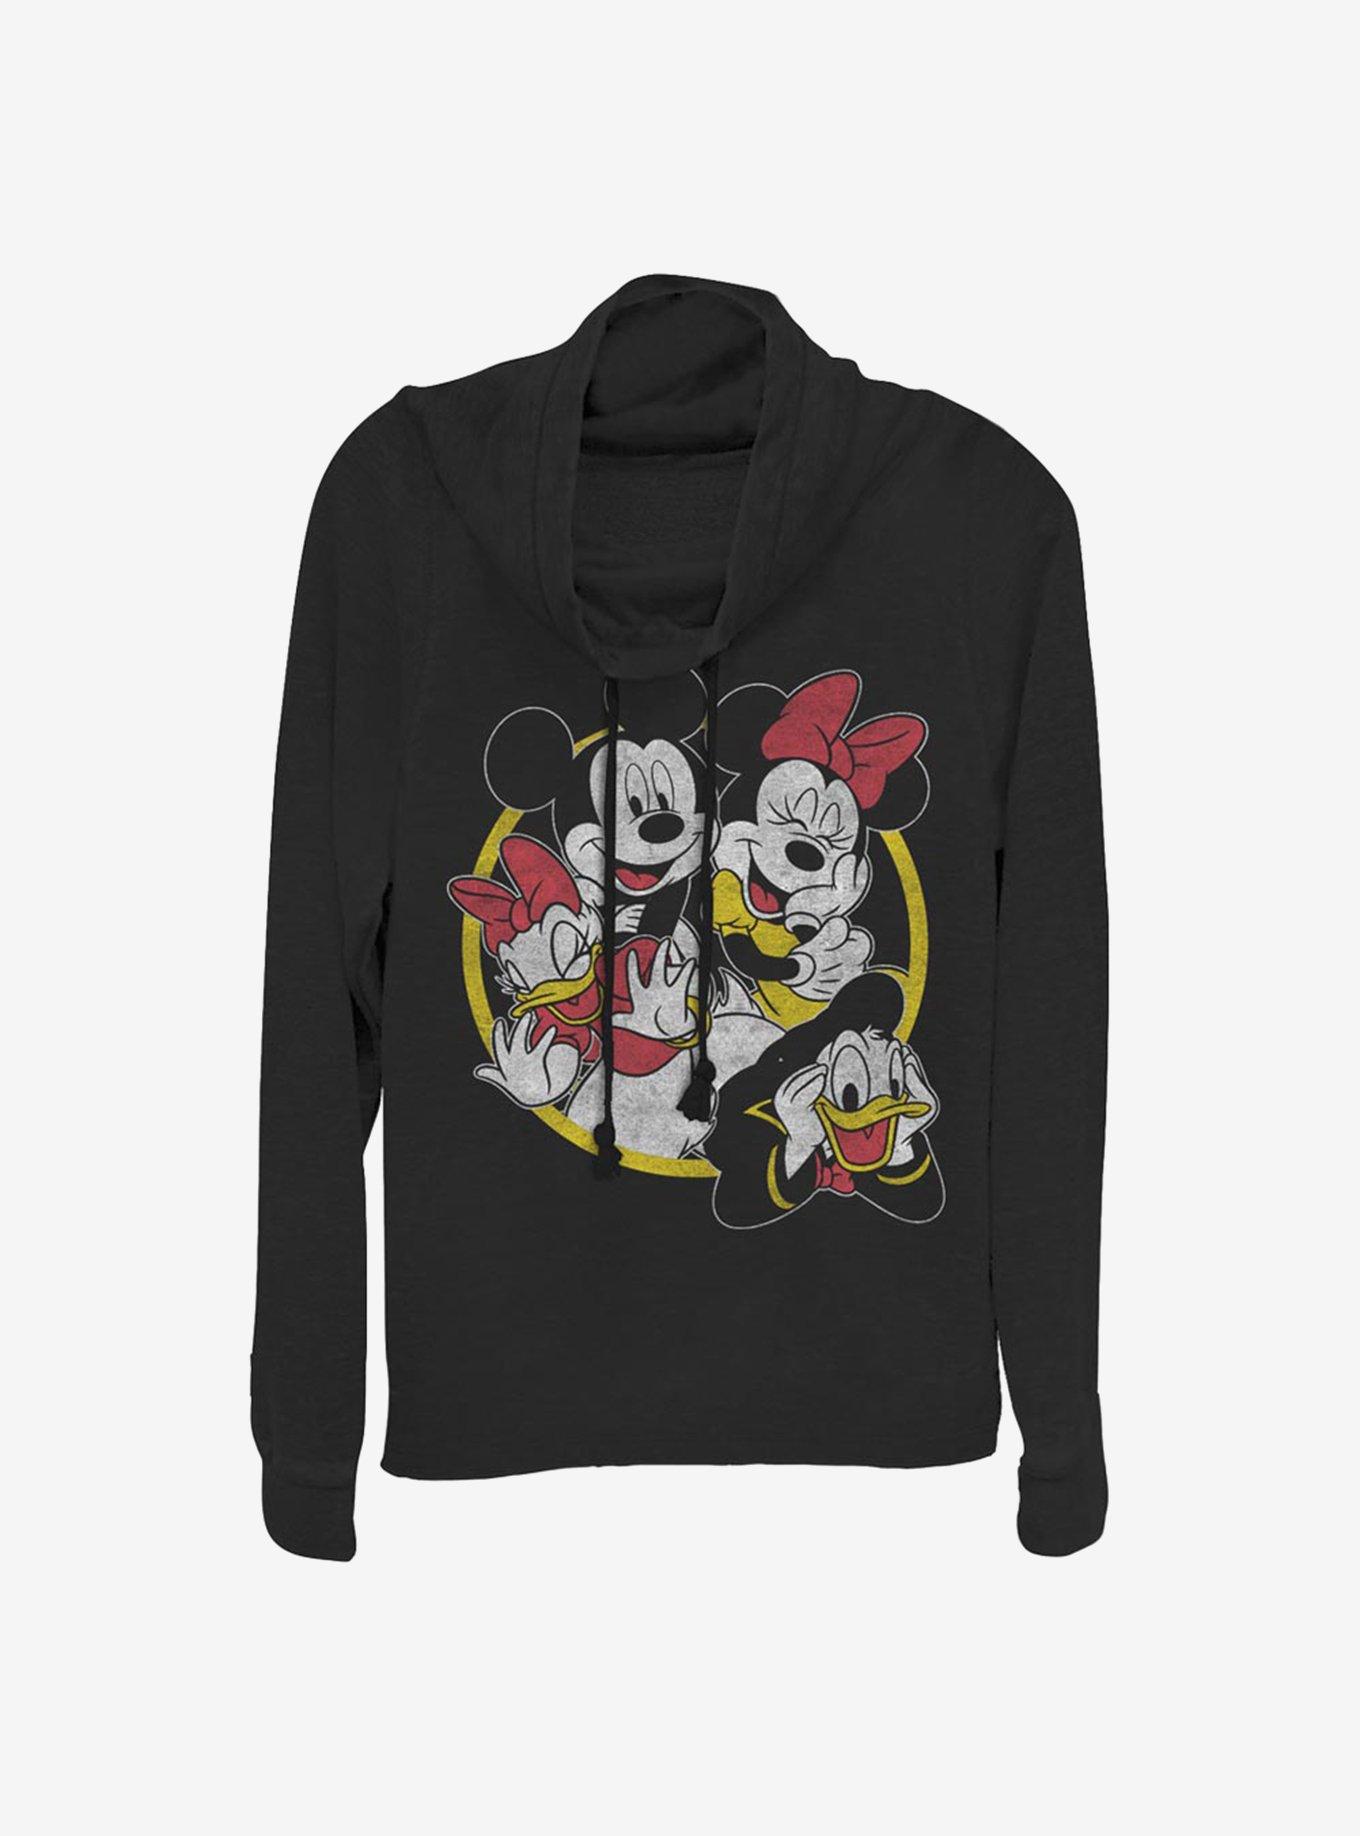 Disney Mickey Mouse And Friends The Crew Group Cowlneck Long-Sleeve Girls Top, BLACK, hi-res